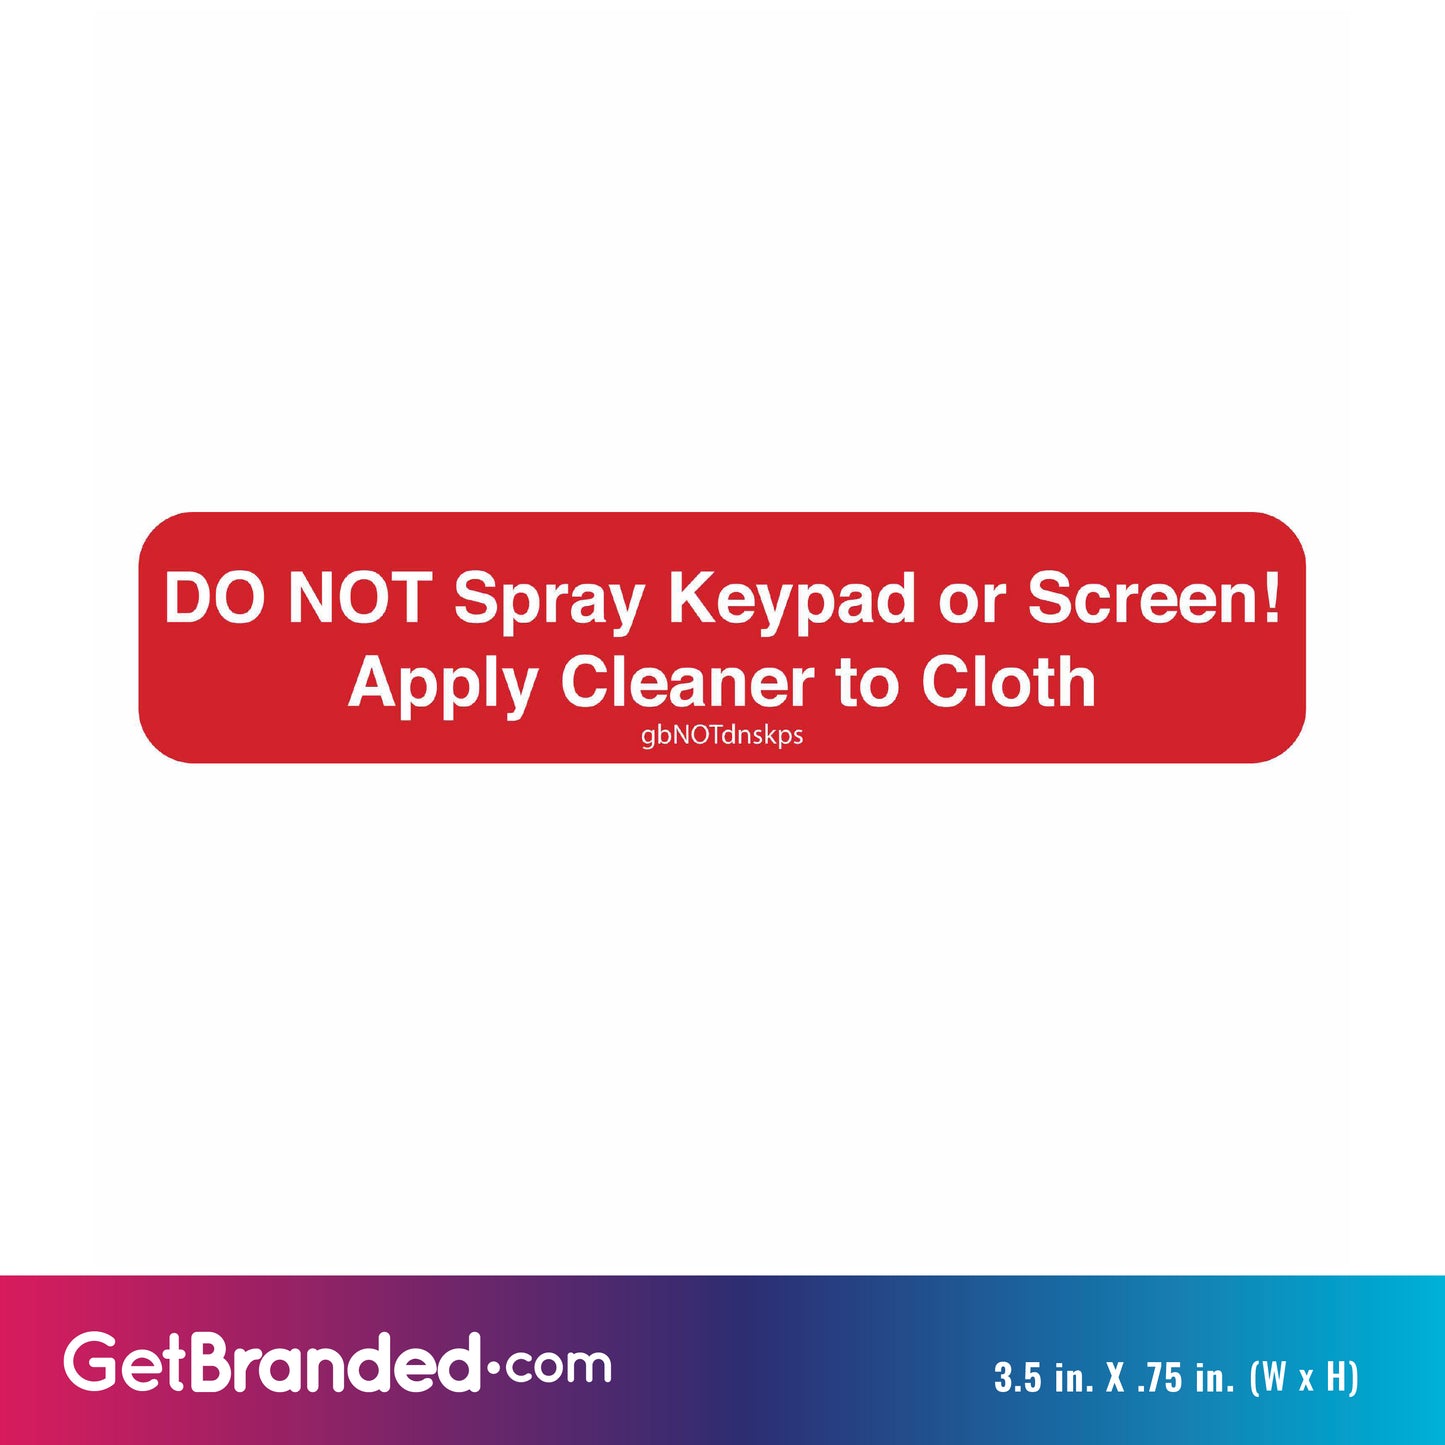 Do Not Spray Keypad or Screen, Apply Cleaner to Cloth Decal size guide.